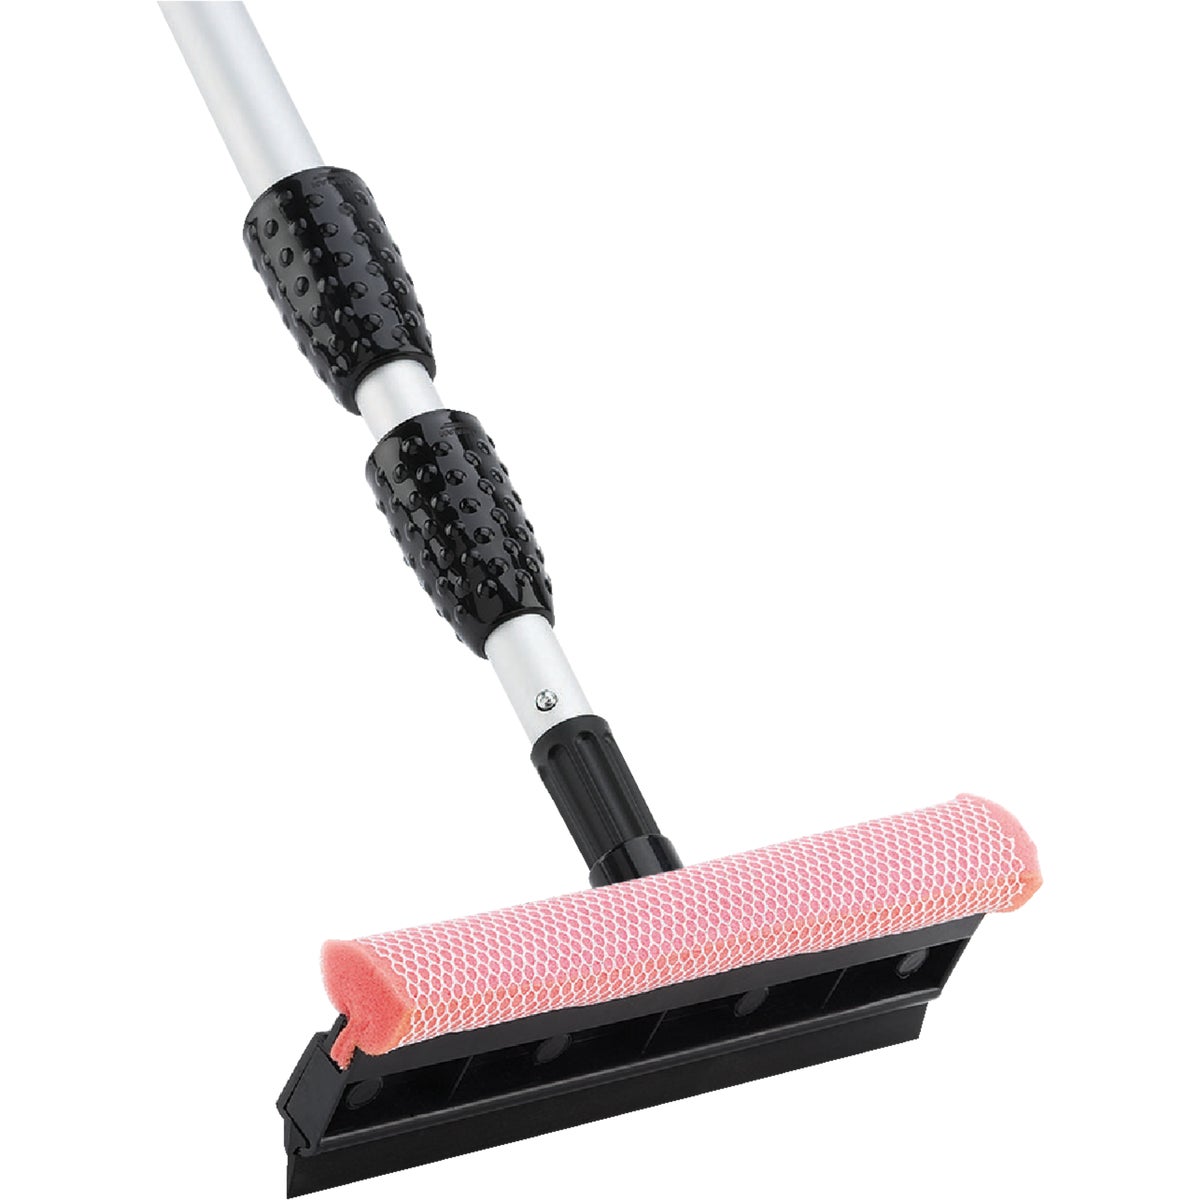 Libman High Power 10 In. Rubber Squeegee